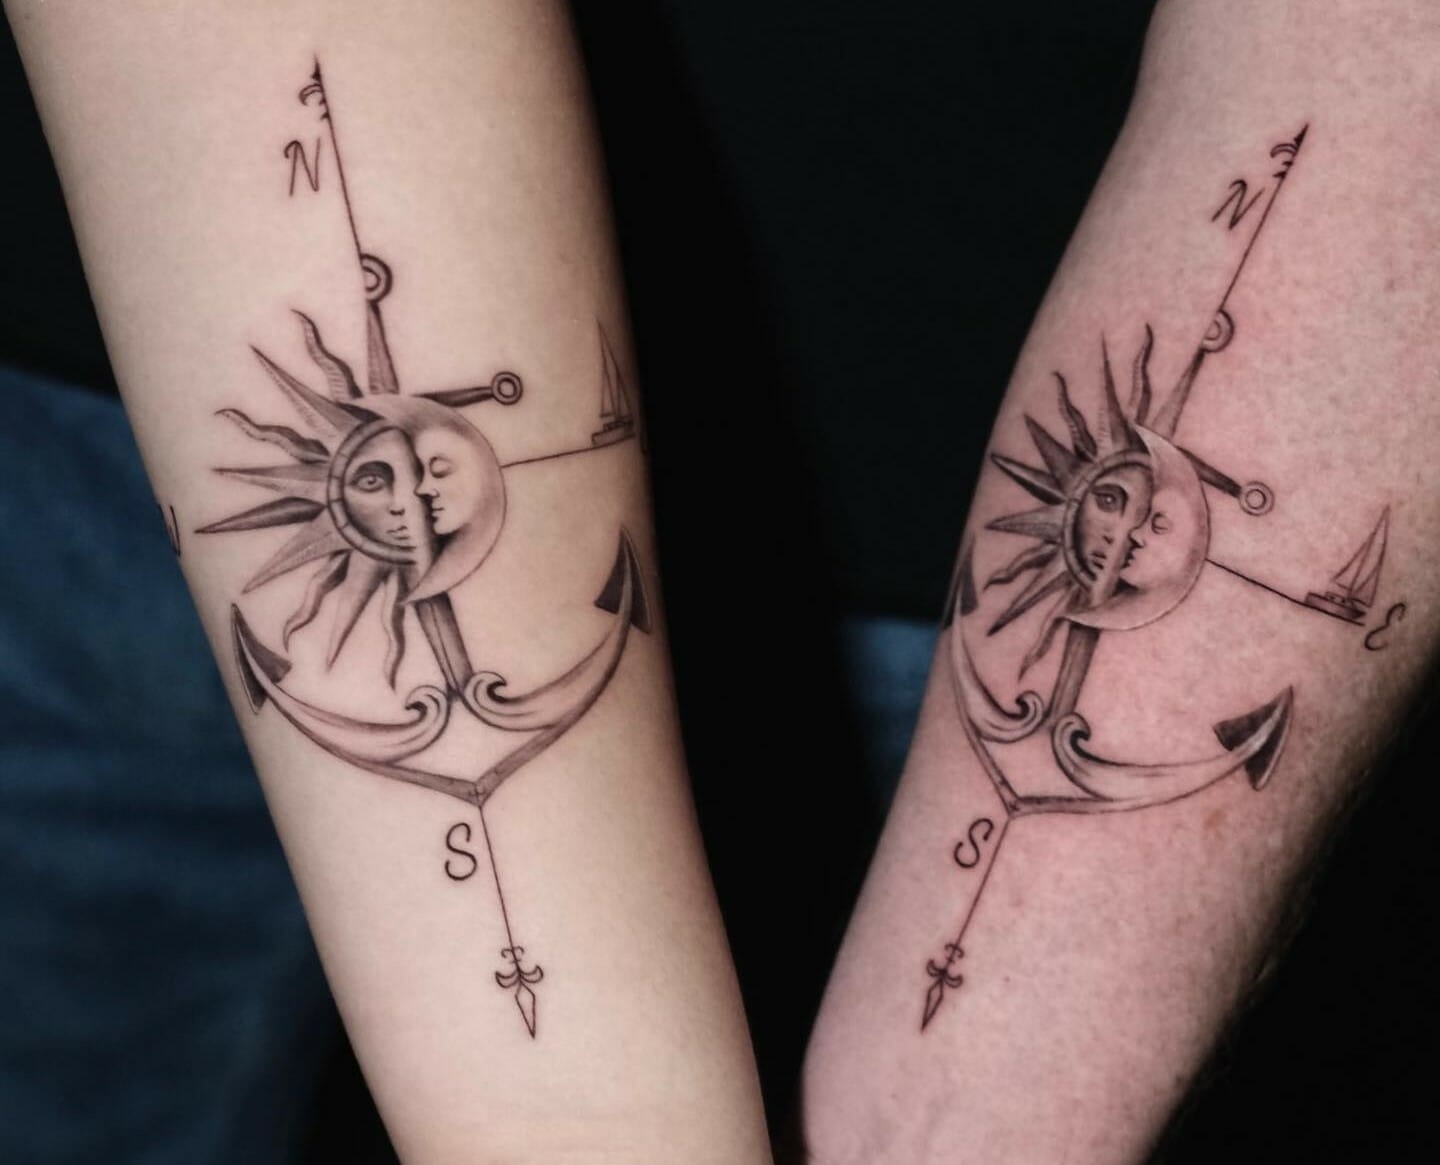 10+ Matching Sun And Moon Tattoo Ideas That Will Blow Your Mind! - alexie